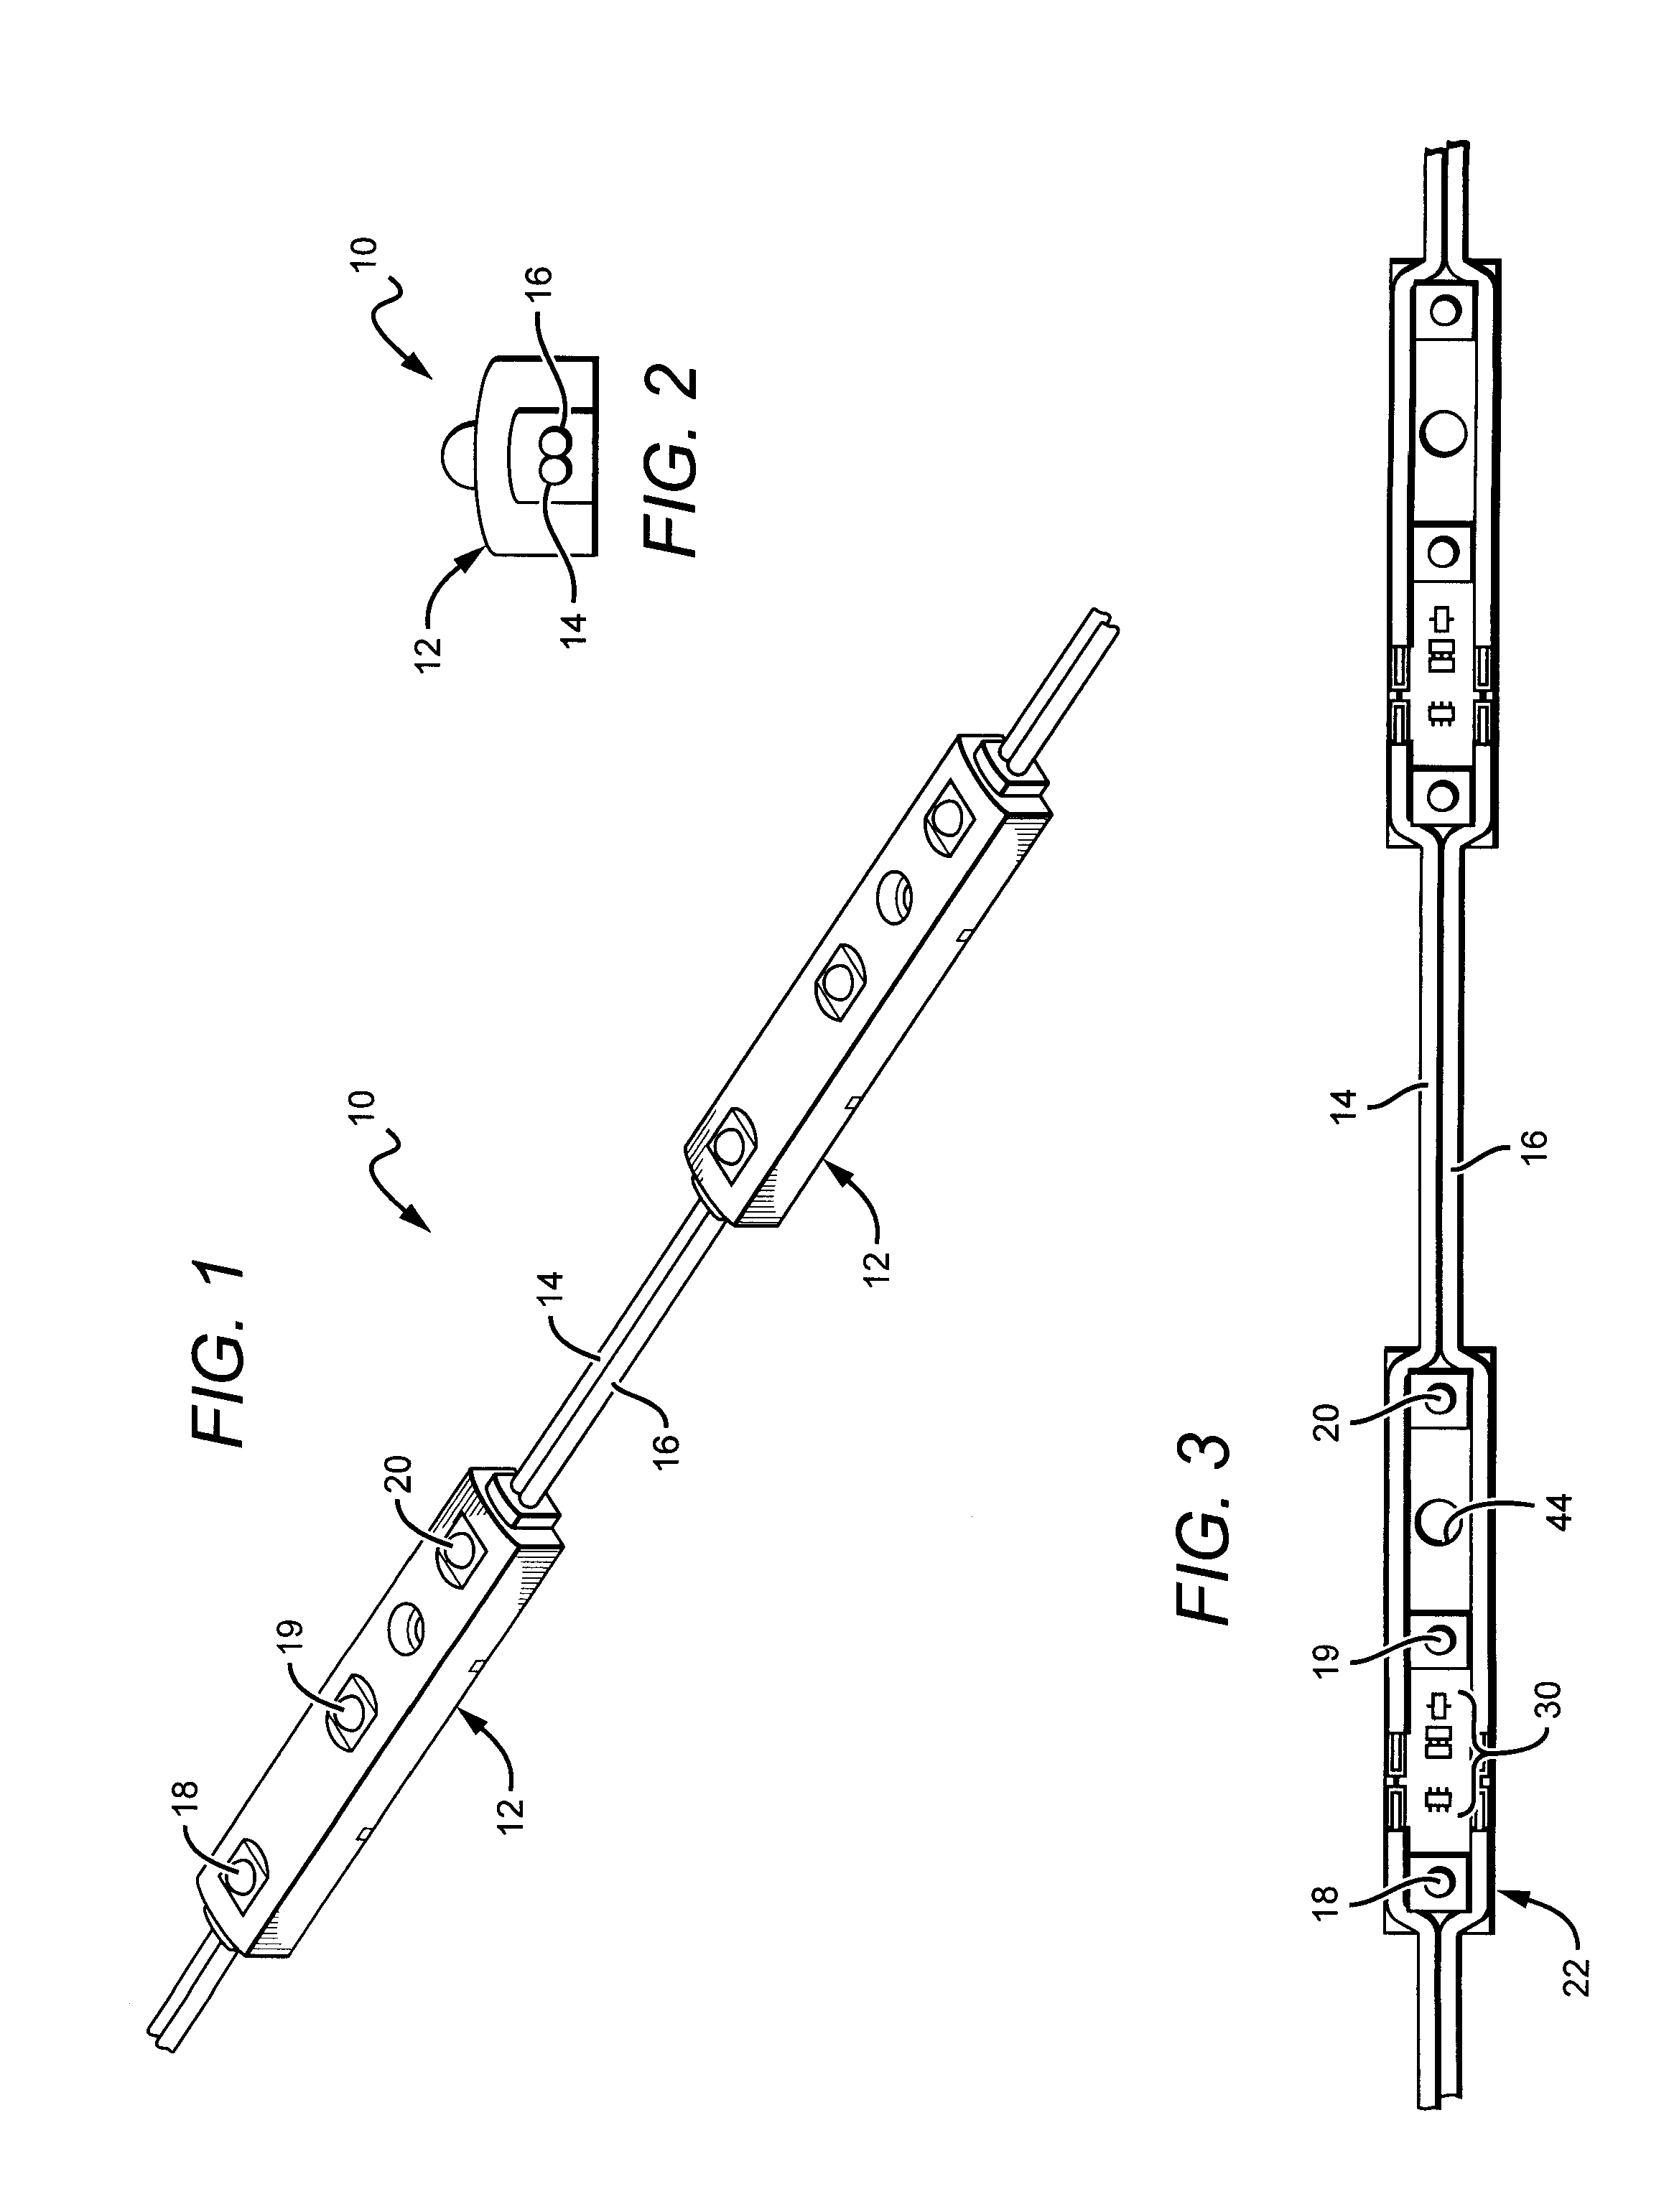 Channel letter lighting system using high output white light emitting diodes